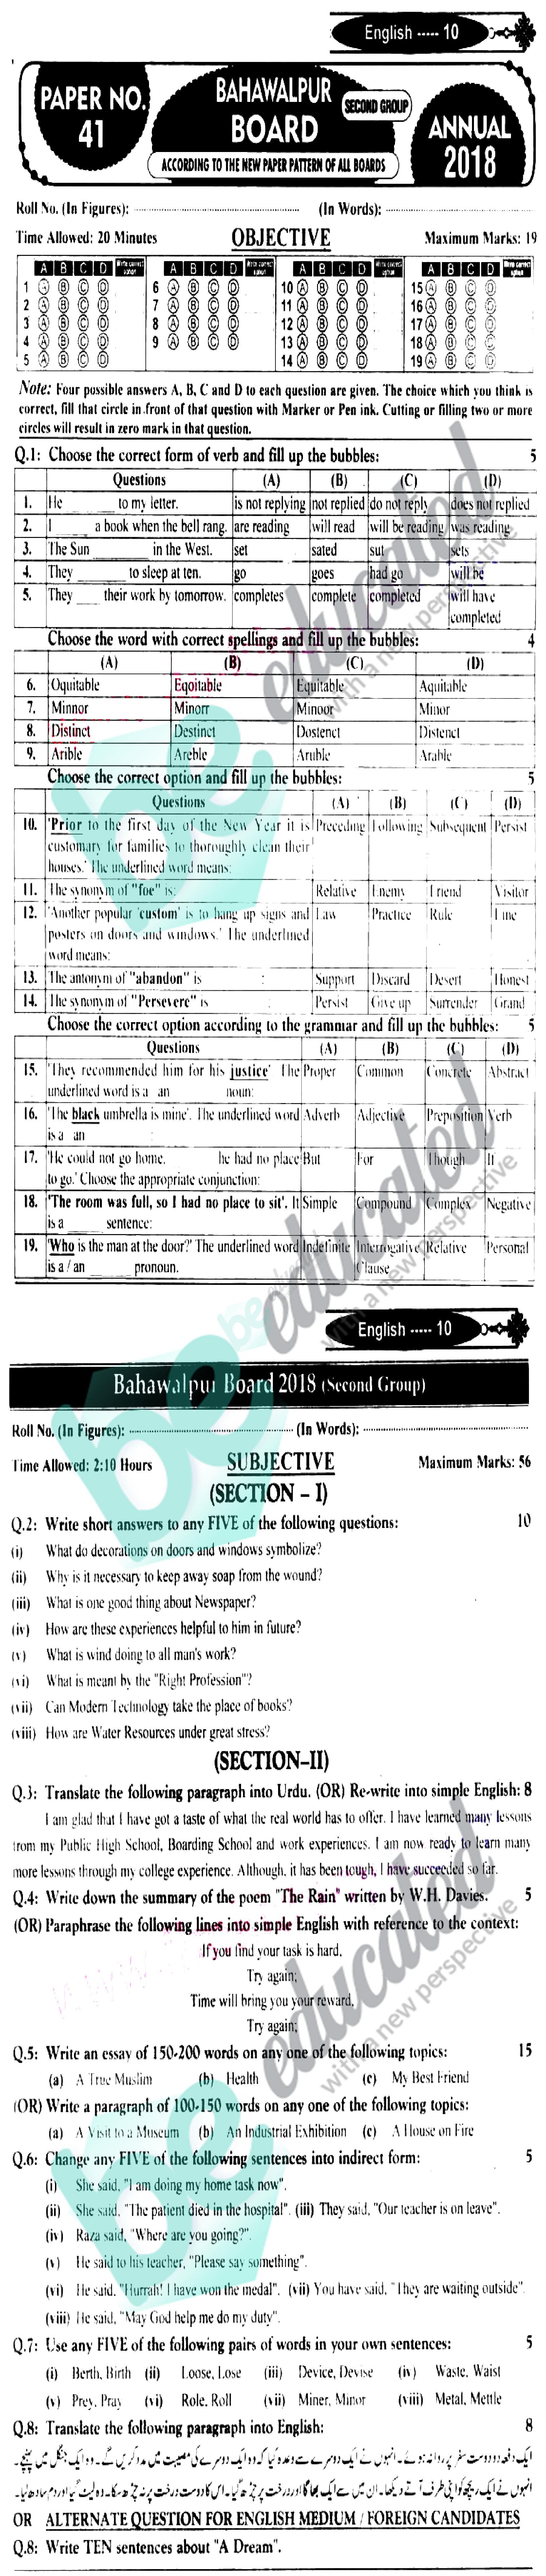 English 10th class Past Paper Group 2 BISE Bahawalpur 2018